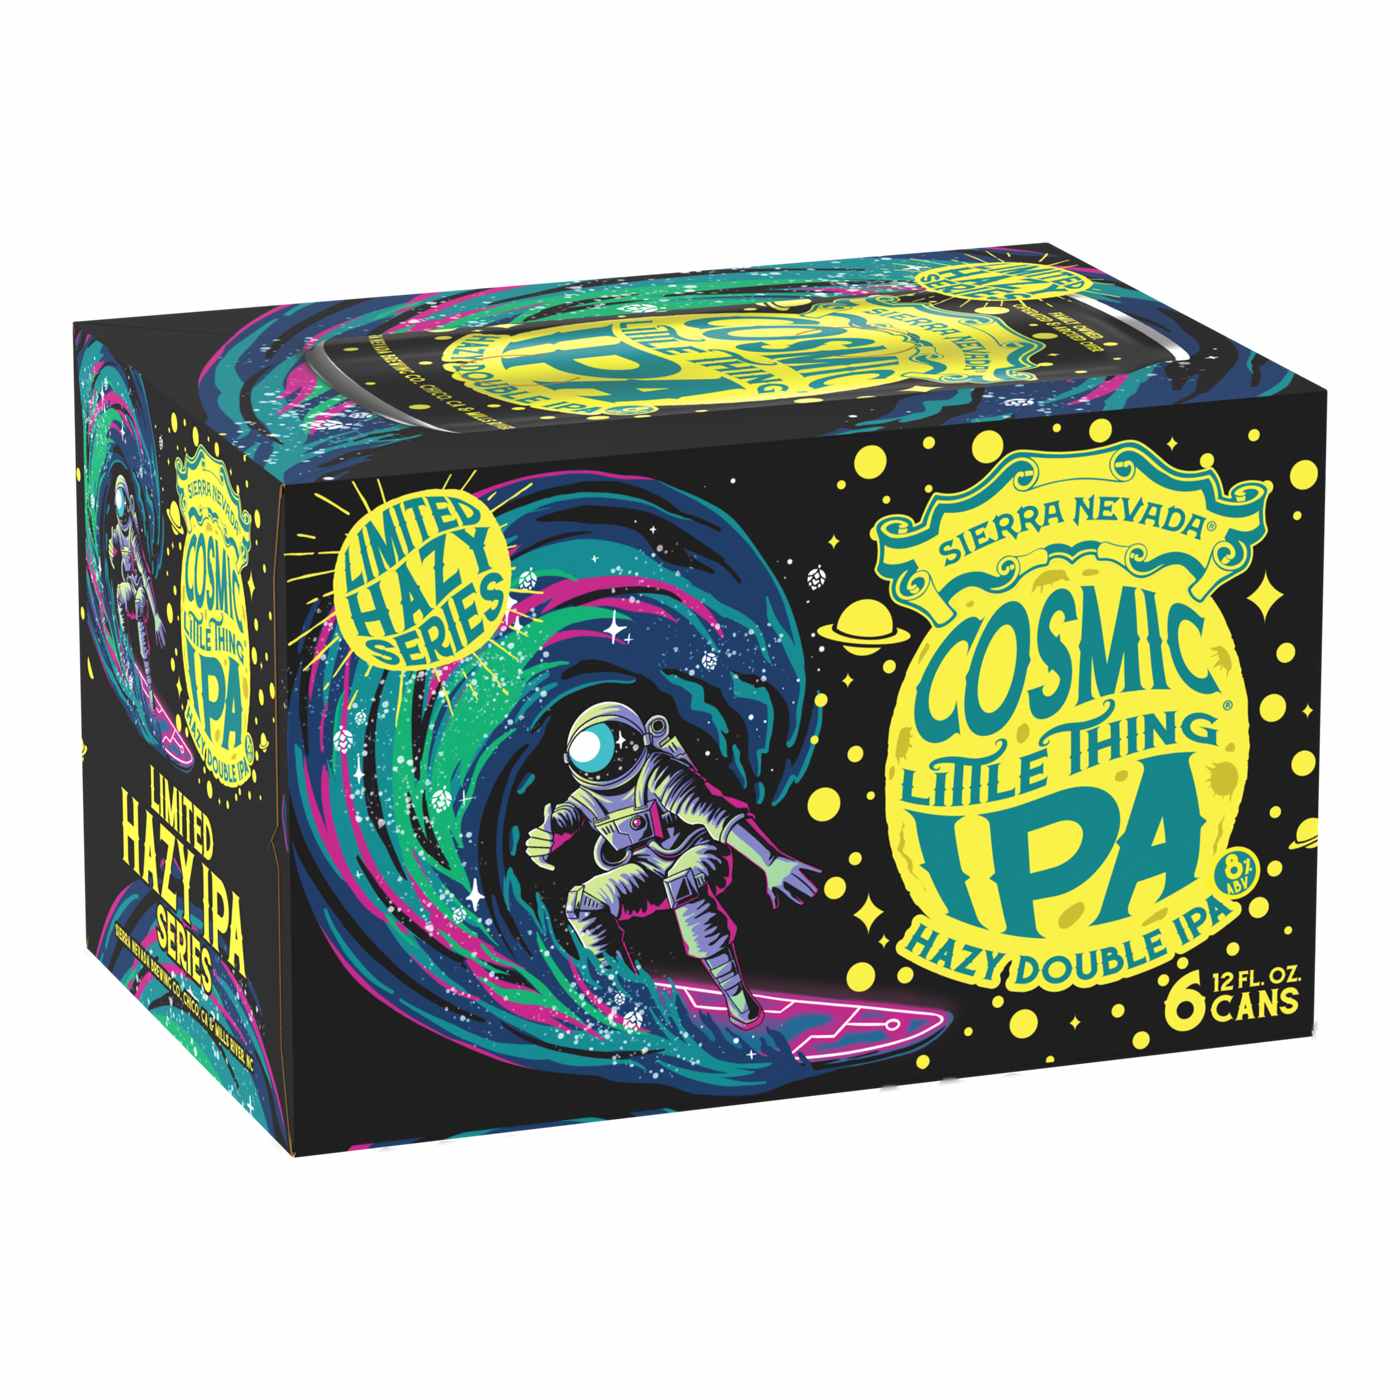 Sierra Nevada Cosmic Little Thing Hazy Double IPA, 6 pk Cans; image 1 of 5